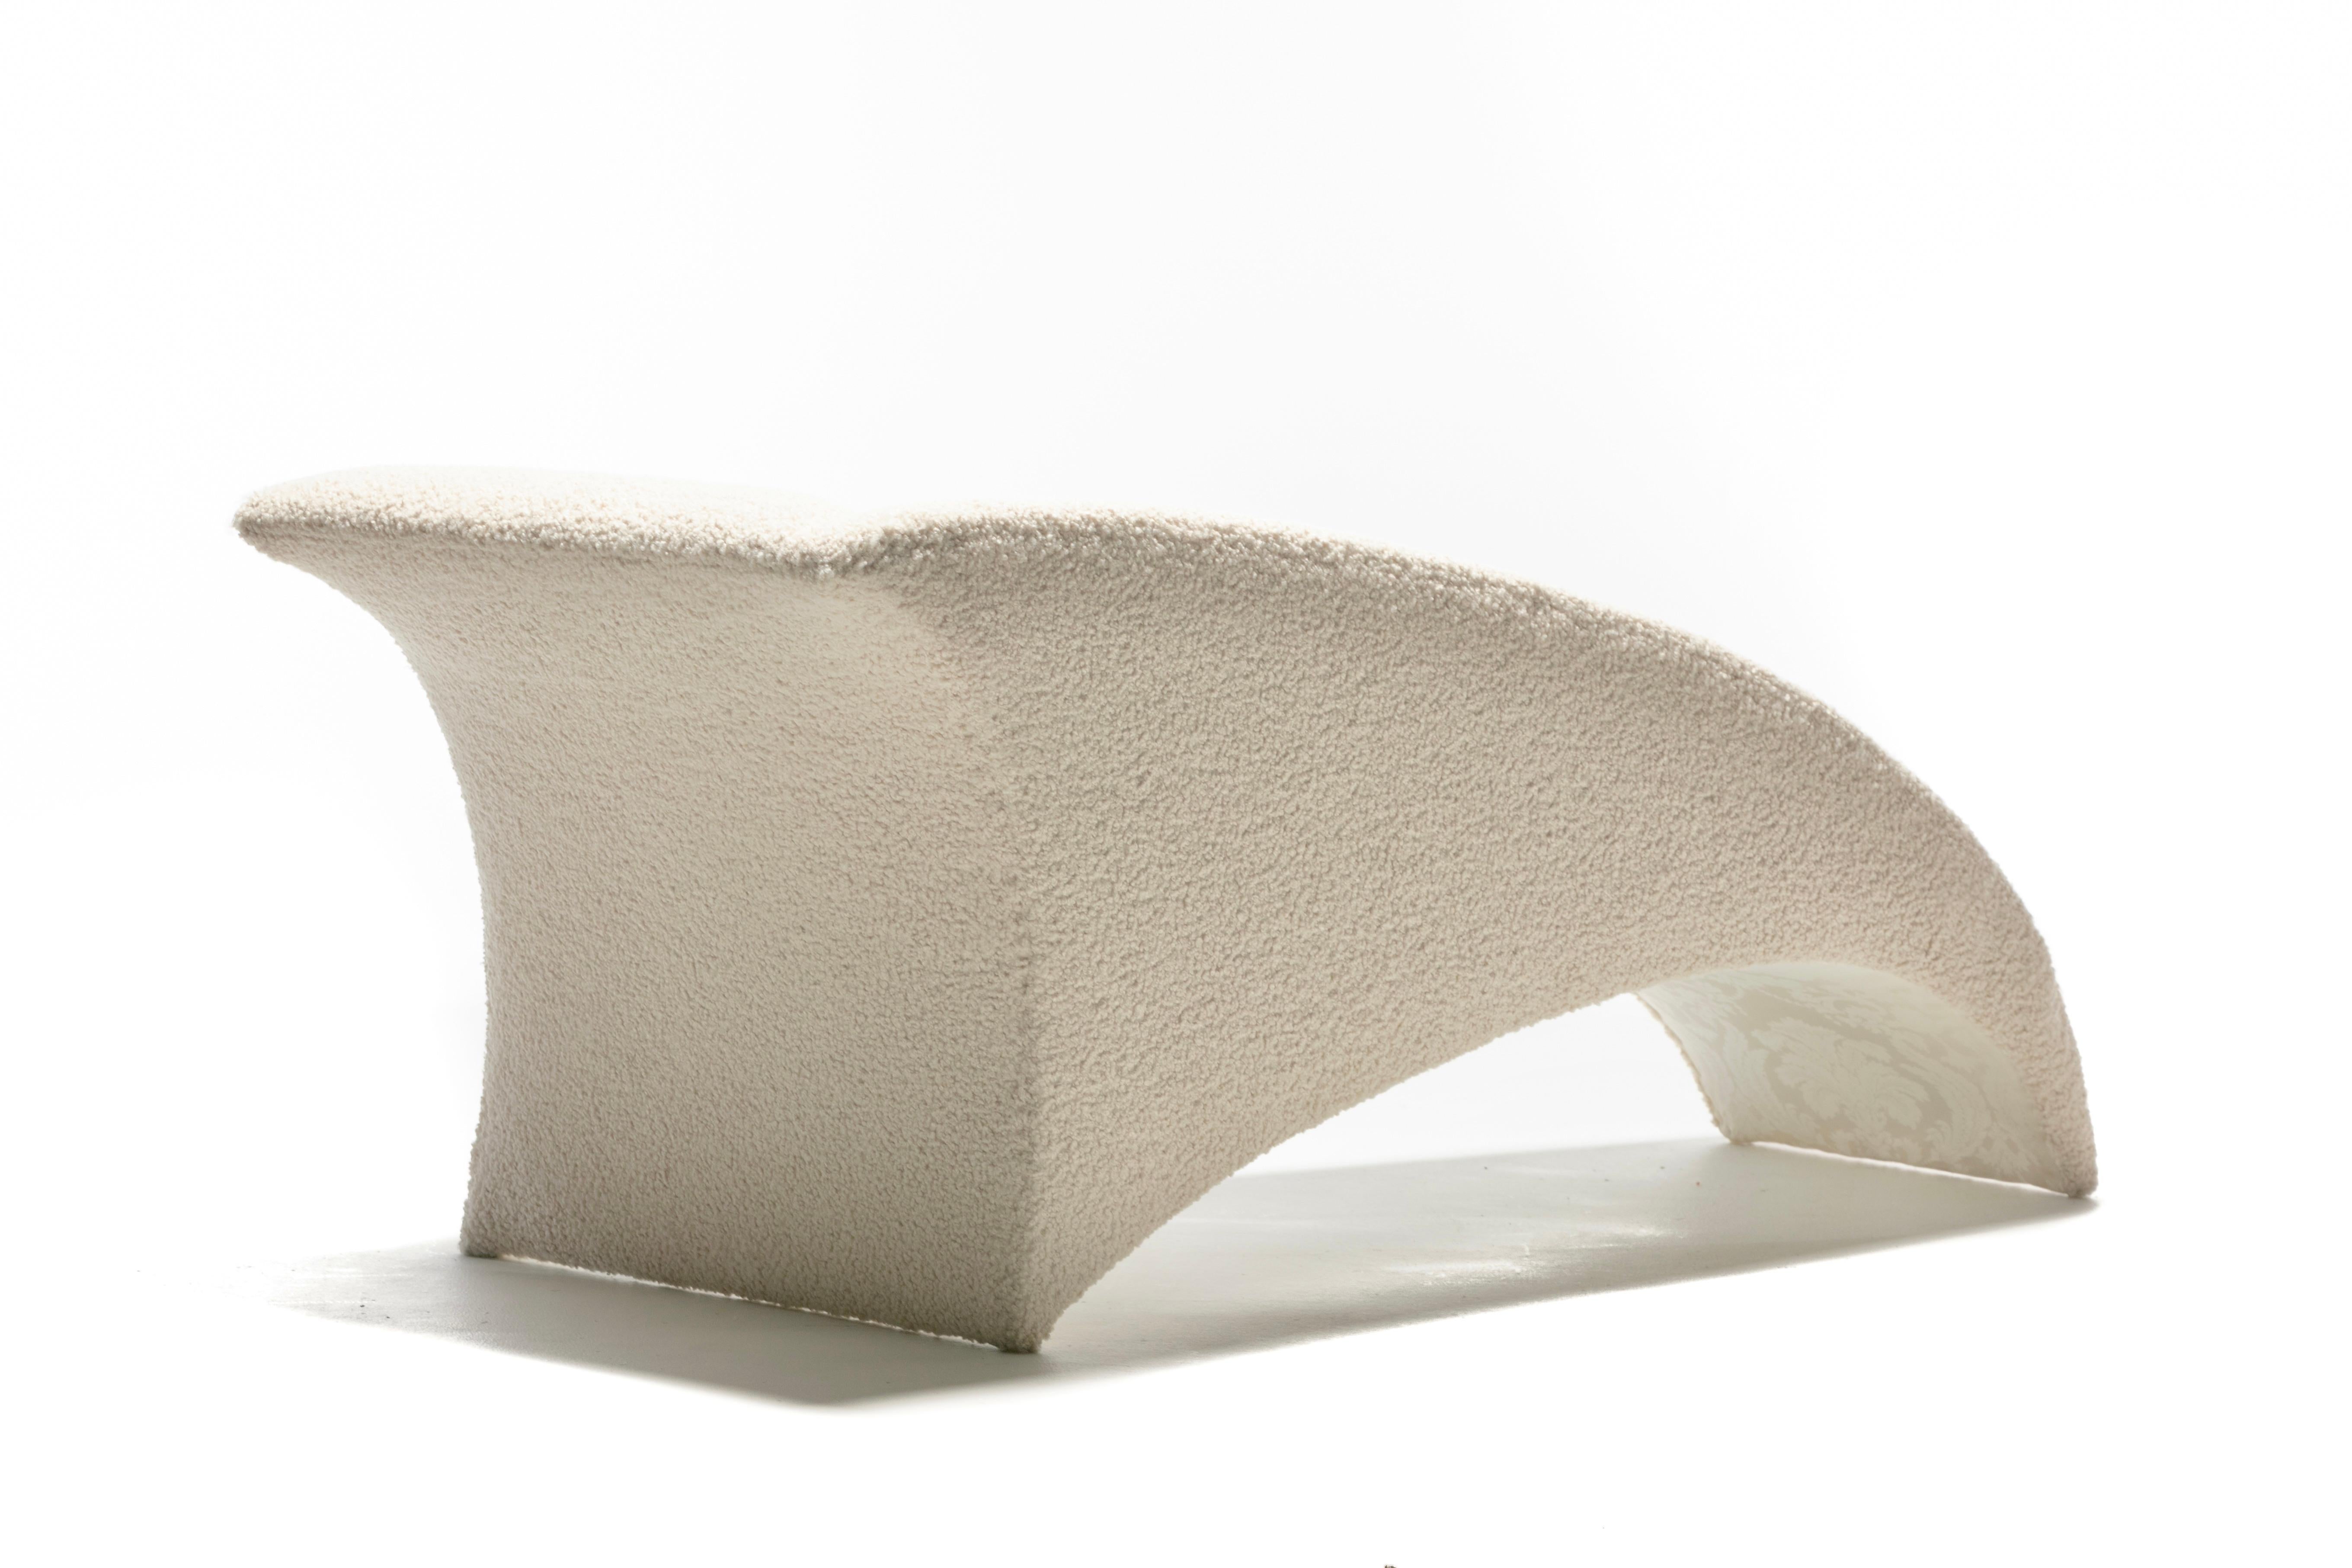 Late 20th Century Vladimir Kagan Post Modern Marilyn Chaise Lounge in Ivory White Bouclé c. 1986 For Sale